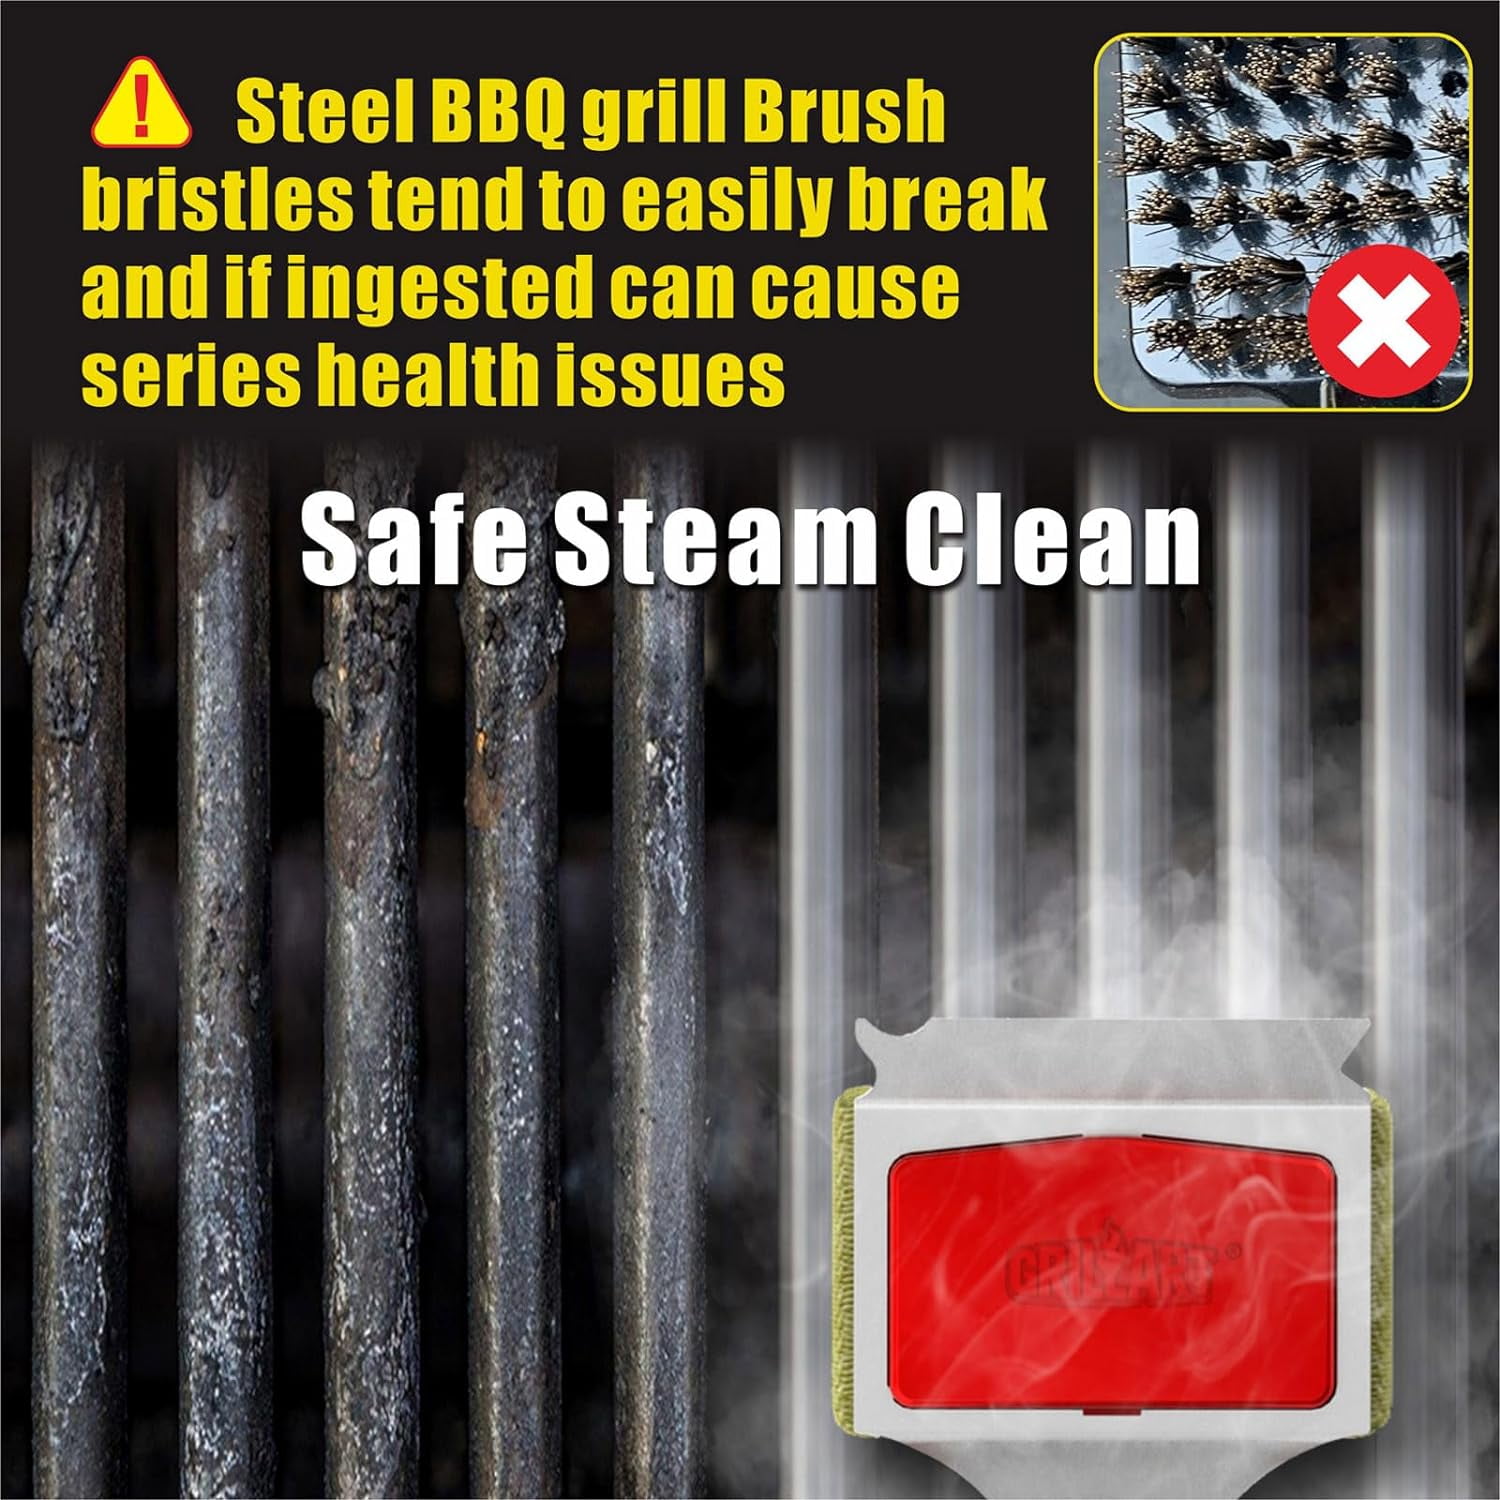 Grill Rescue BBQ Replaceable Scraper Cleaning Head, Bristle Free - Durable and Unique Scraper Tools for Cast Iron or Stainless-S